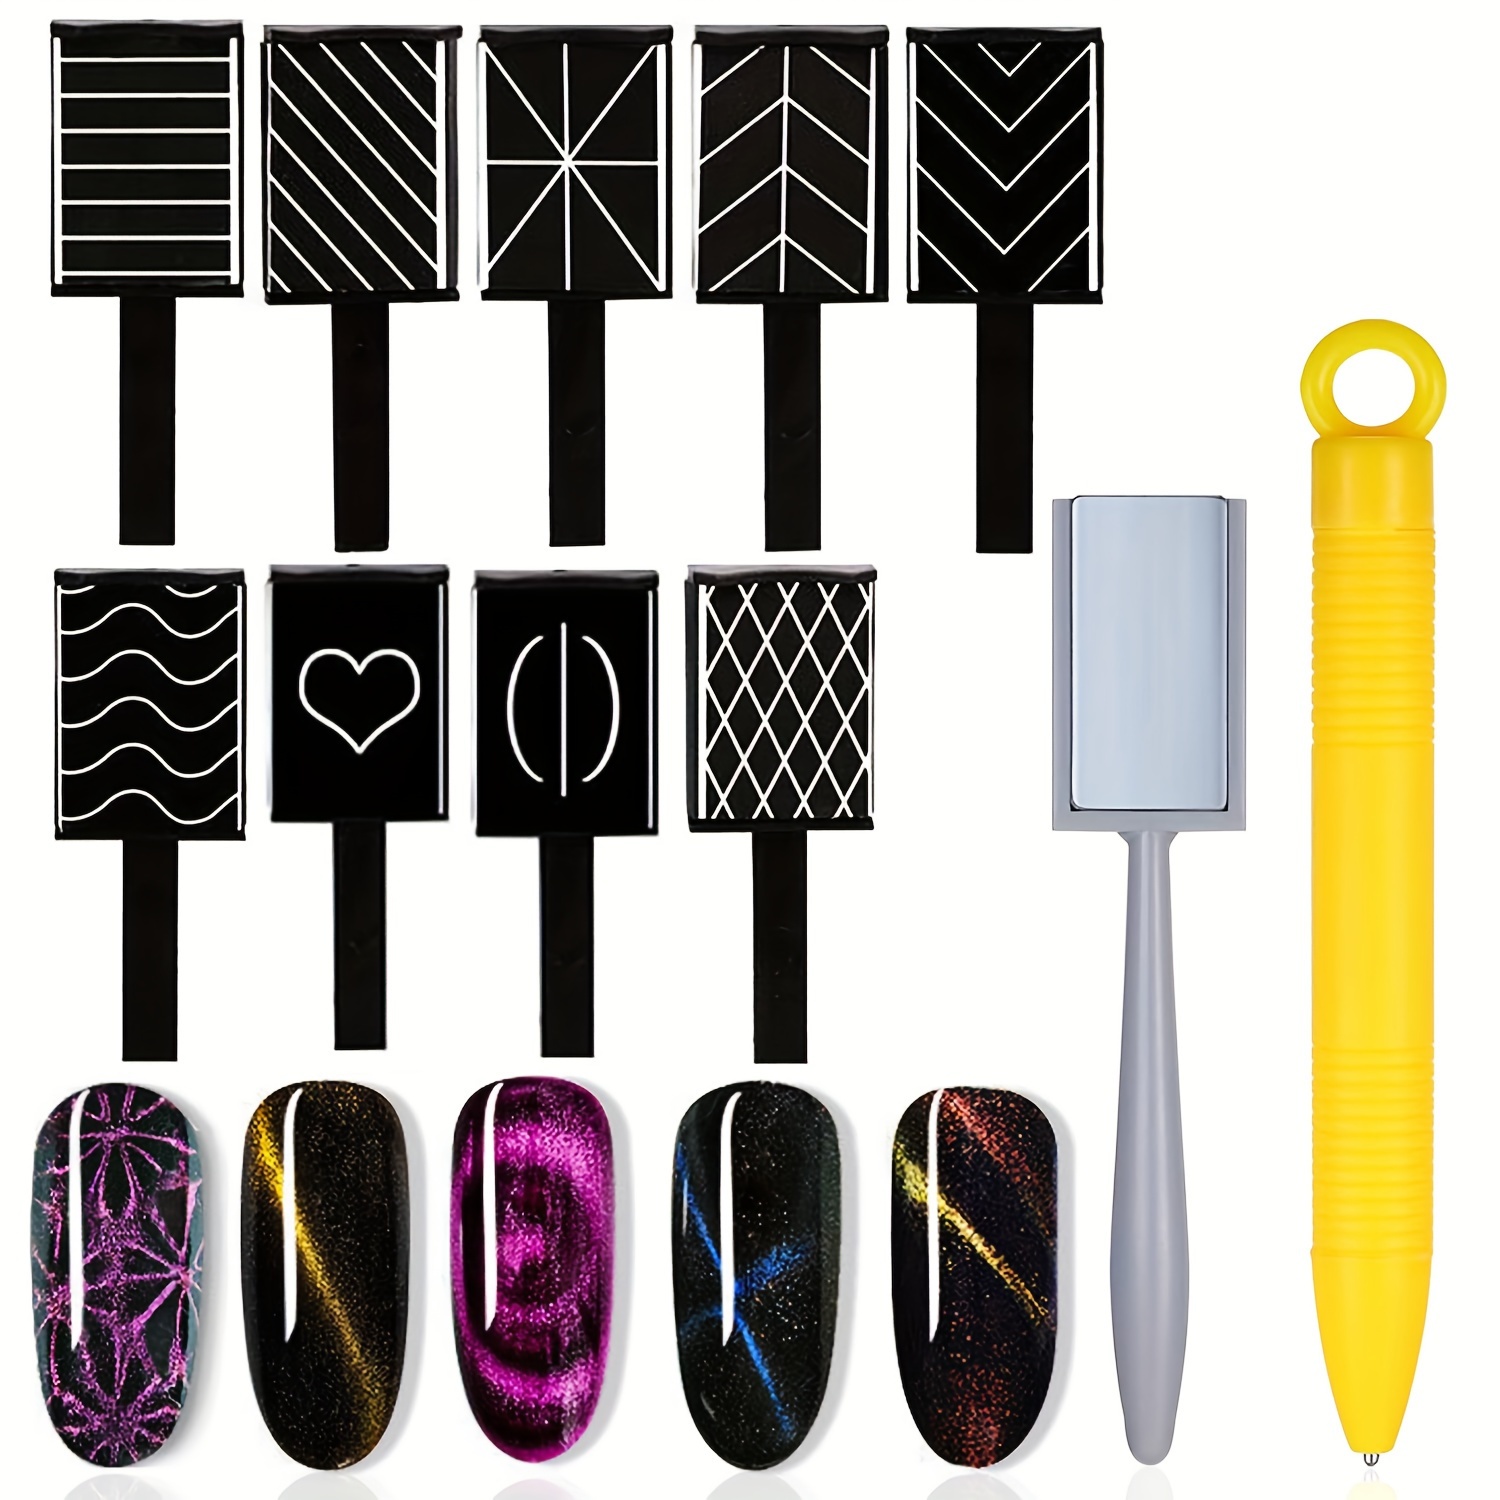 

11 Pieces Nail Art Cat Eye Magnet For Nails Magnetic Gel Polish Pen Tools, Nail Magnet Wand Board, Cat Eye Gel Polish Magent Sticks Tool Set, For Cat Eye Nails Art Polish Magnet Pen